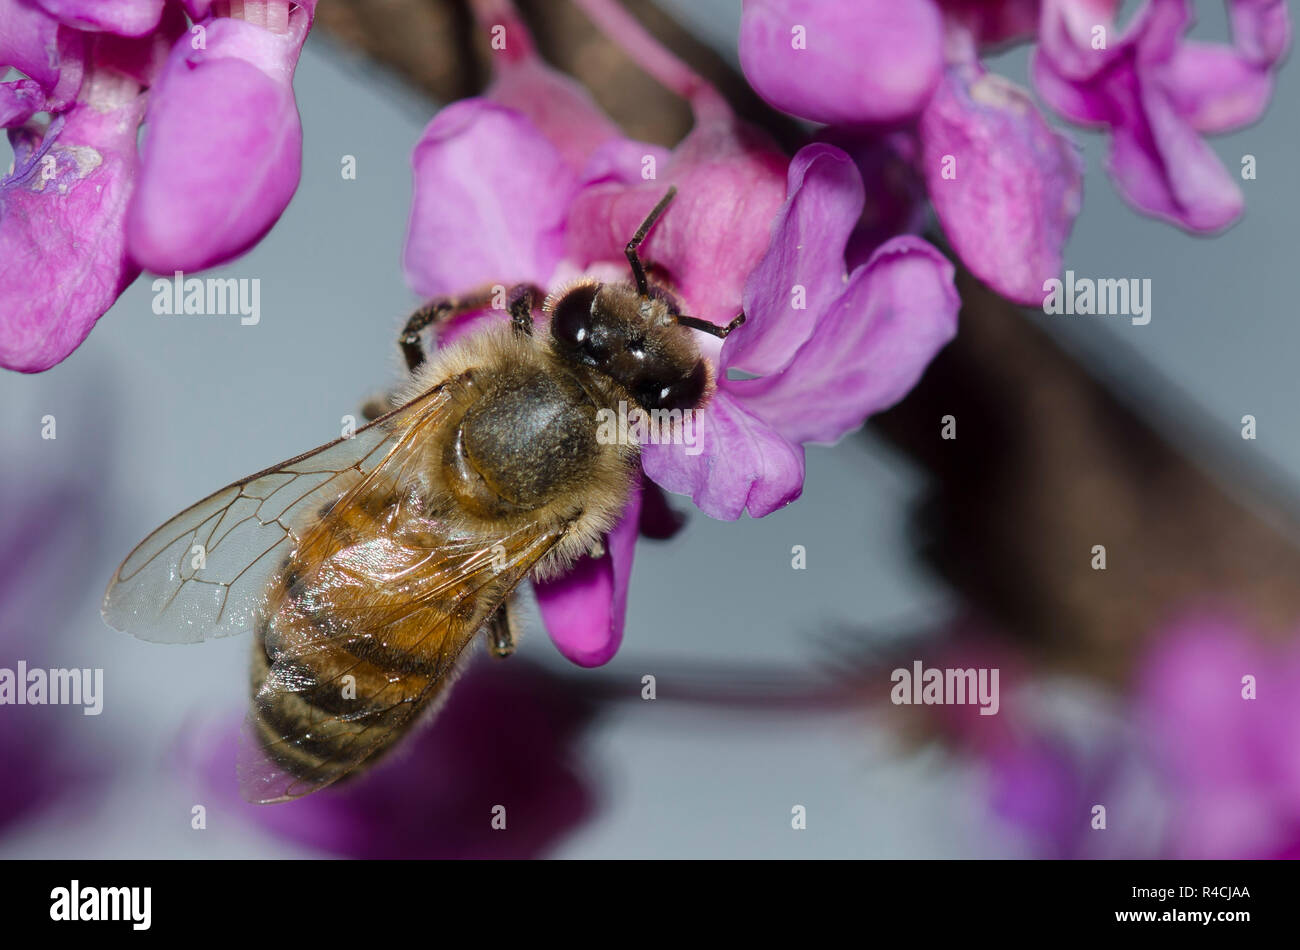 Honey Bee, Apis mellifera, foraging on Eastern Redbud, Cercis canadensis, blossoms Stock Photo